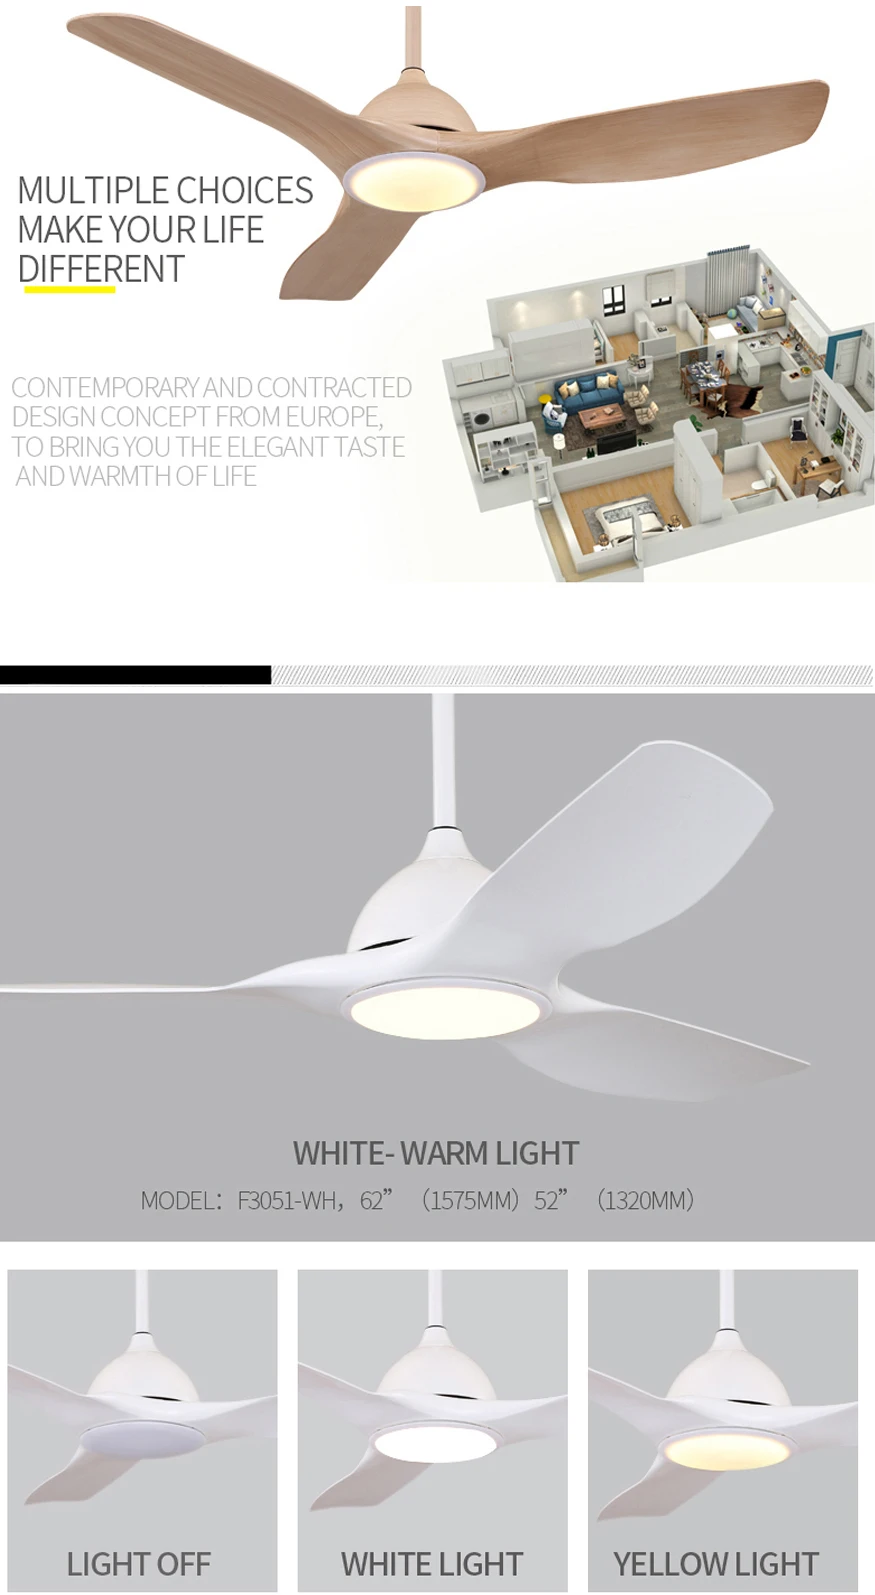 3 Wooden Blades Low Energy Ceiling Fan with 3 Color LED Light